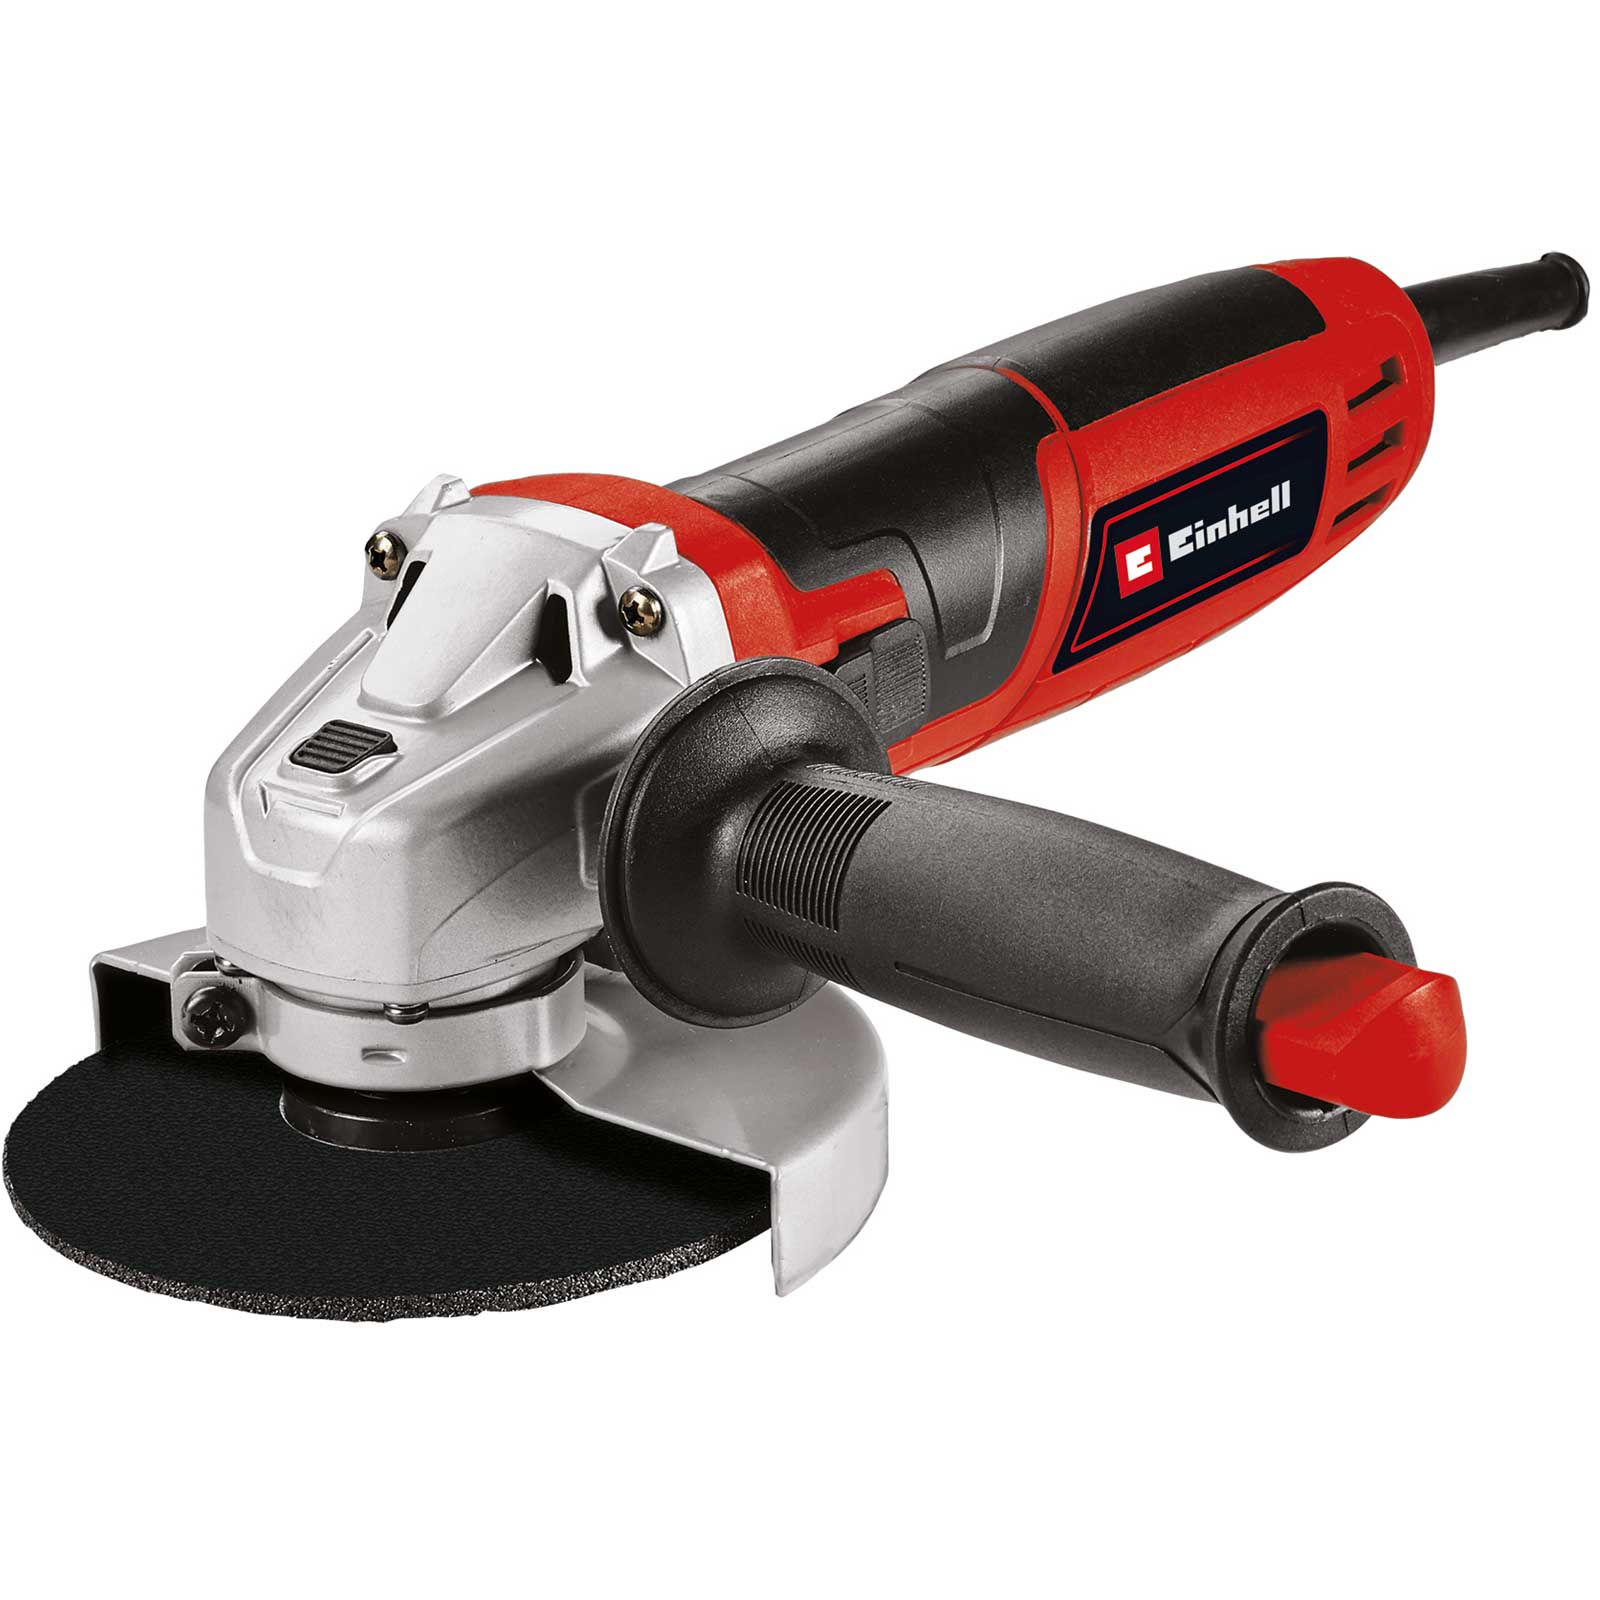 Photo of Einhell Tc-ag 115/750 Angle Grinder 115mm